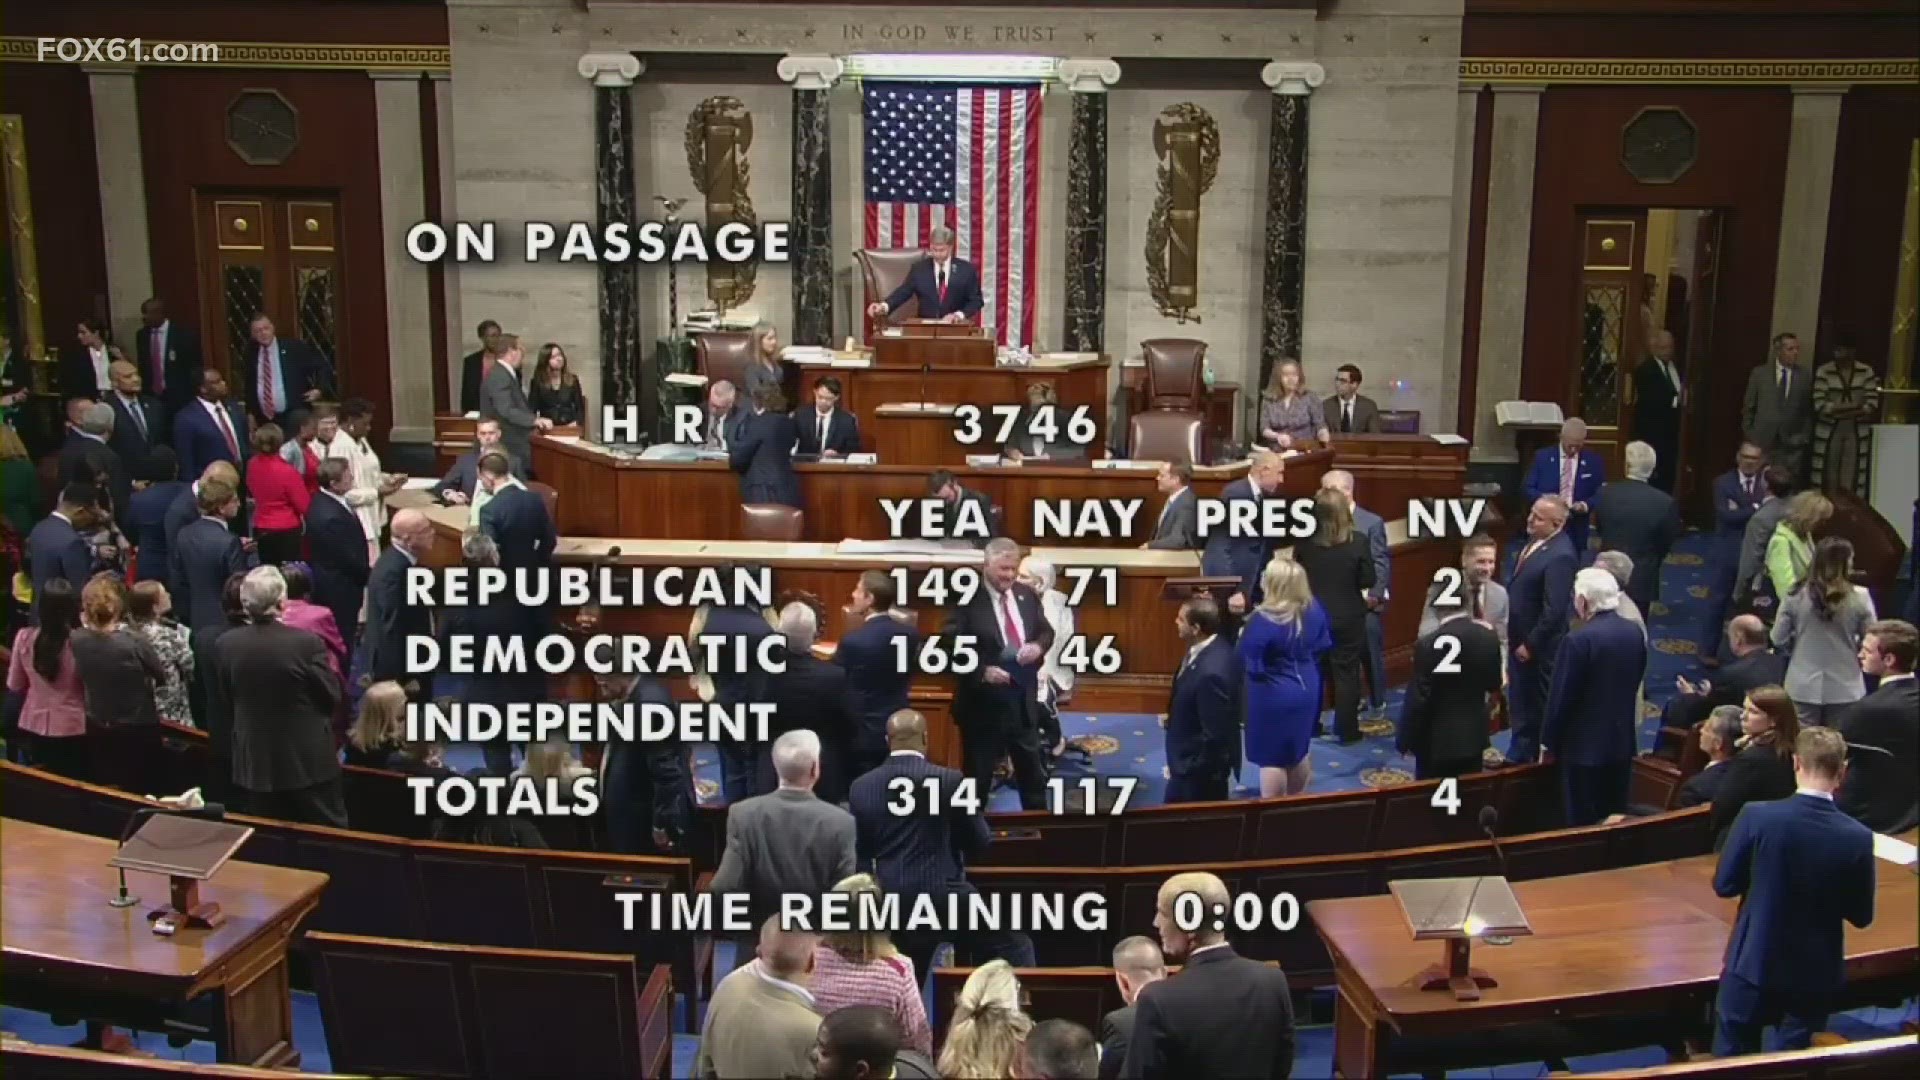 With the House vote of 314-117, the bill now heads to the Senate with passage expected by week's end.